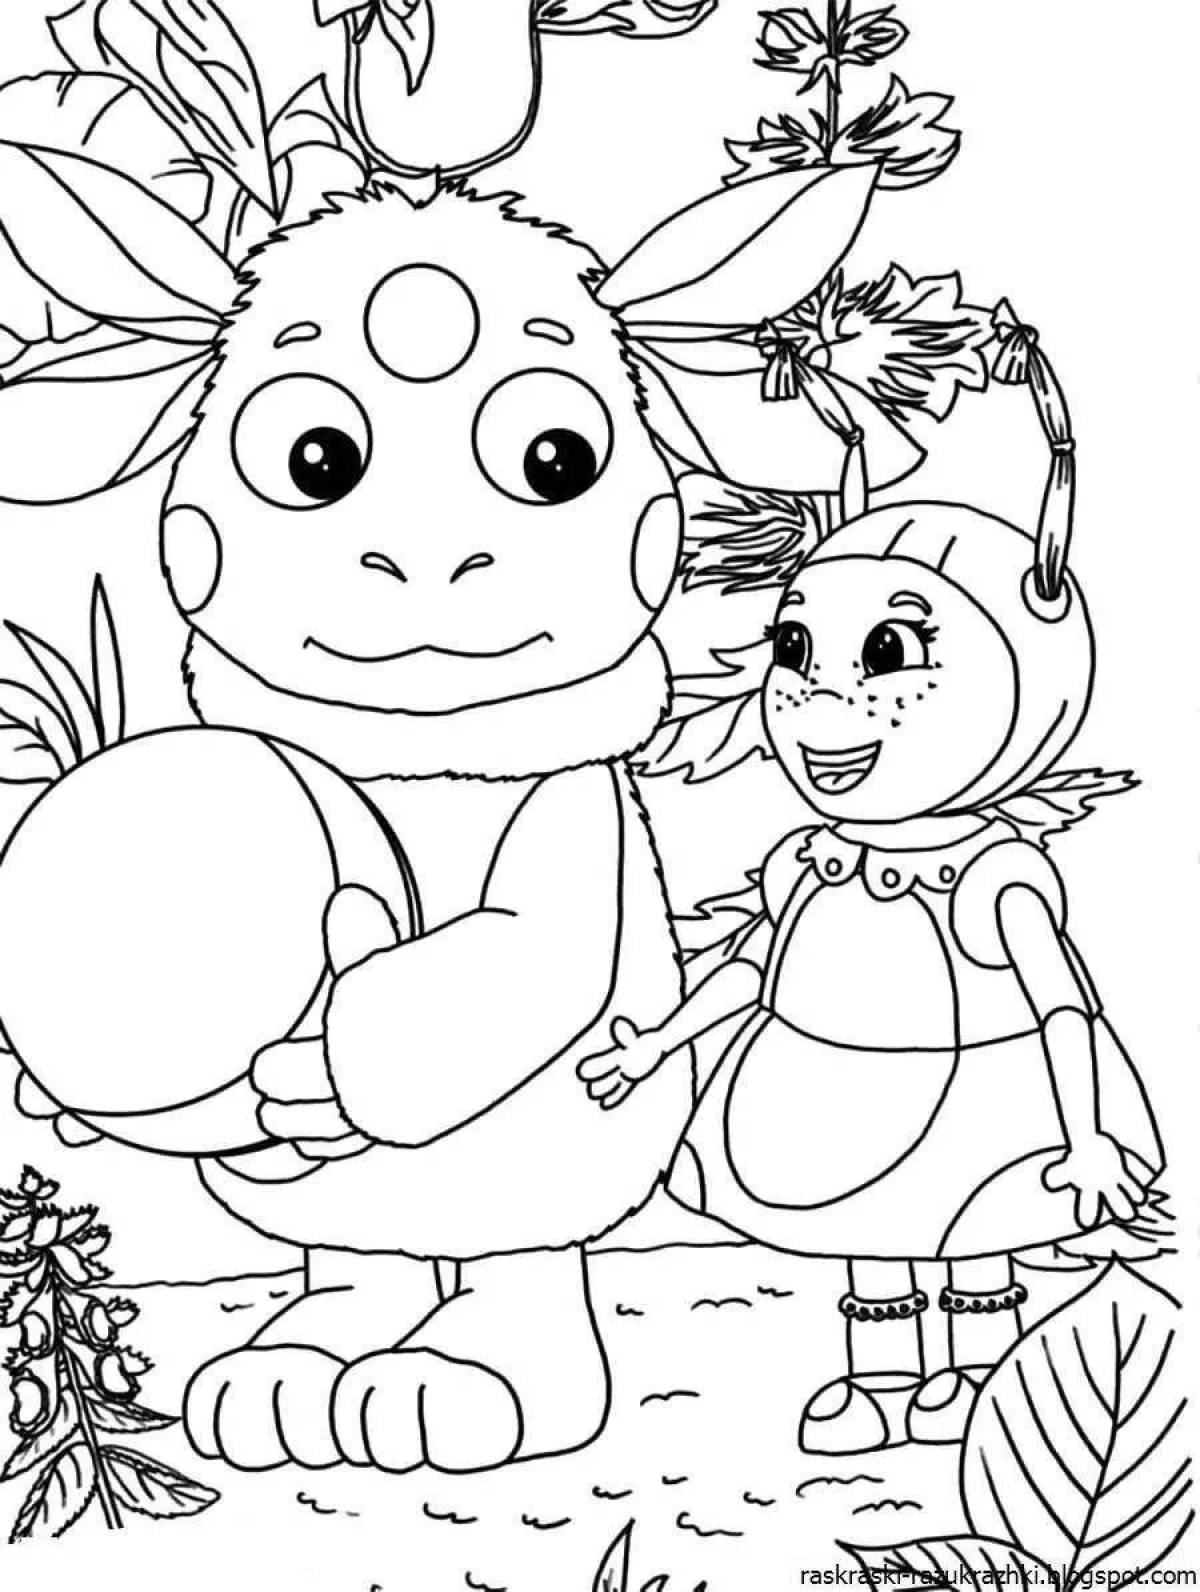 Magic cartoon coloring book for 4-5 year olds